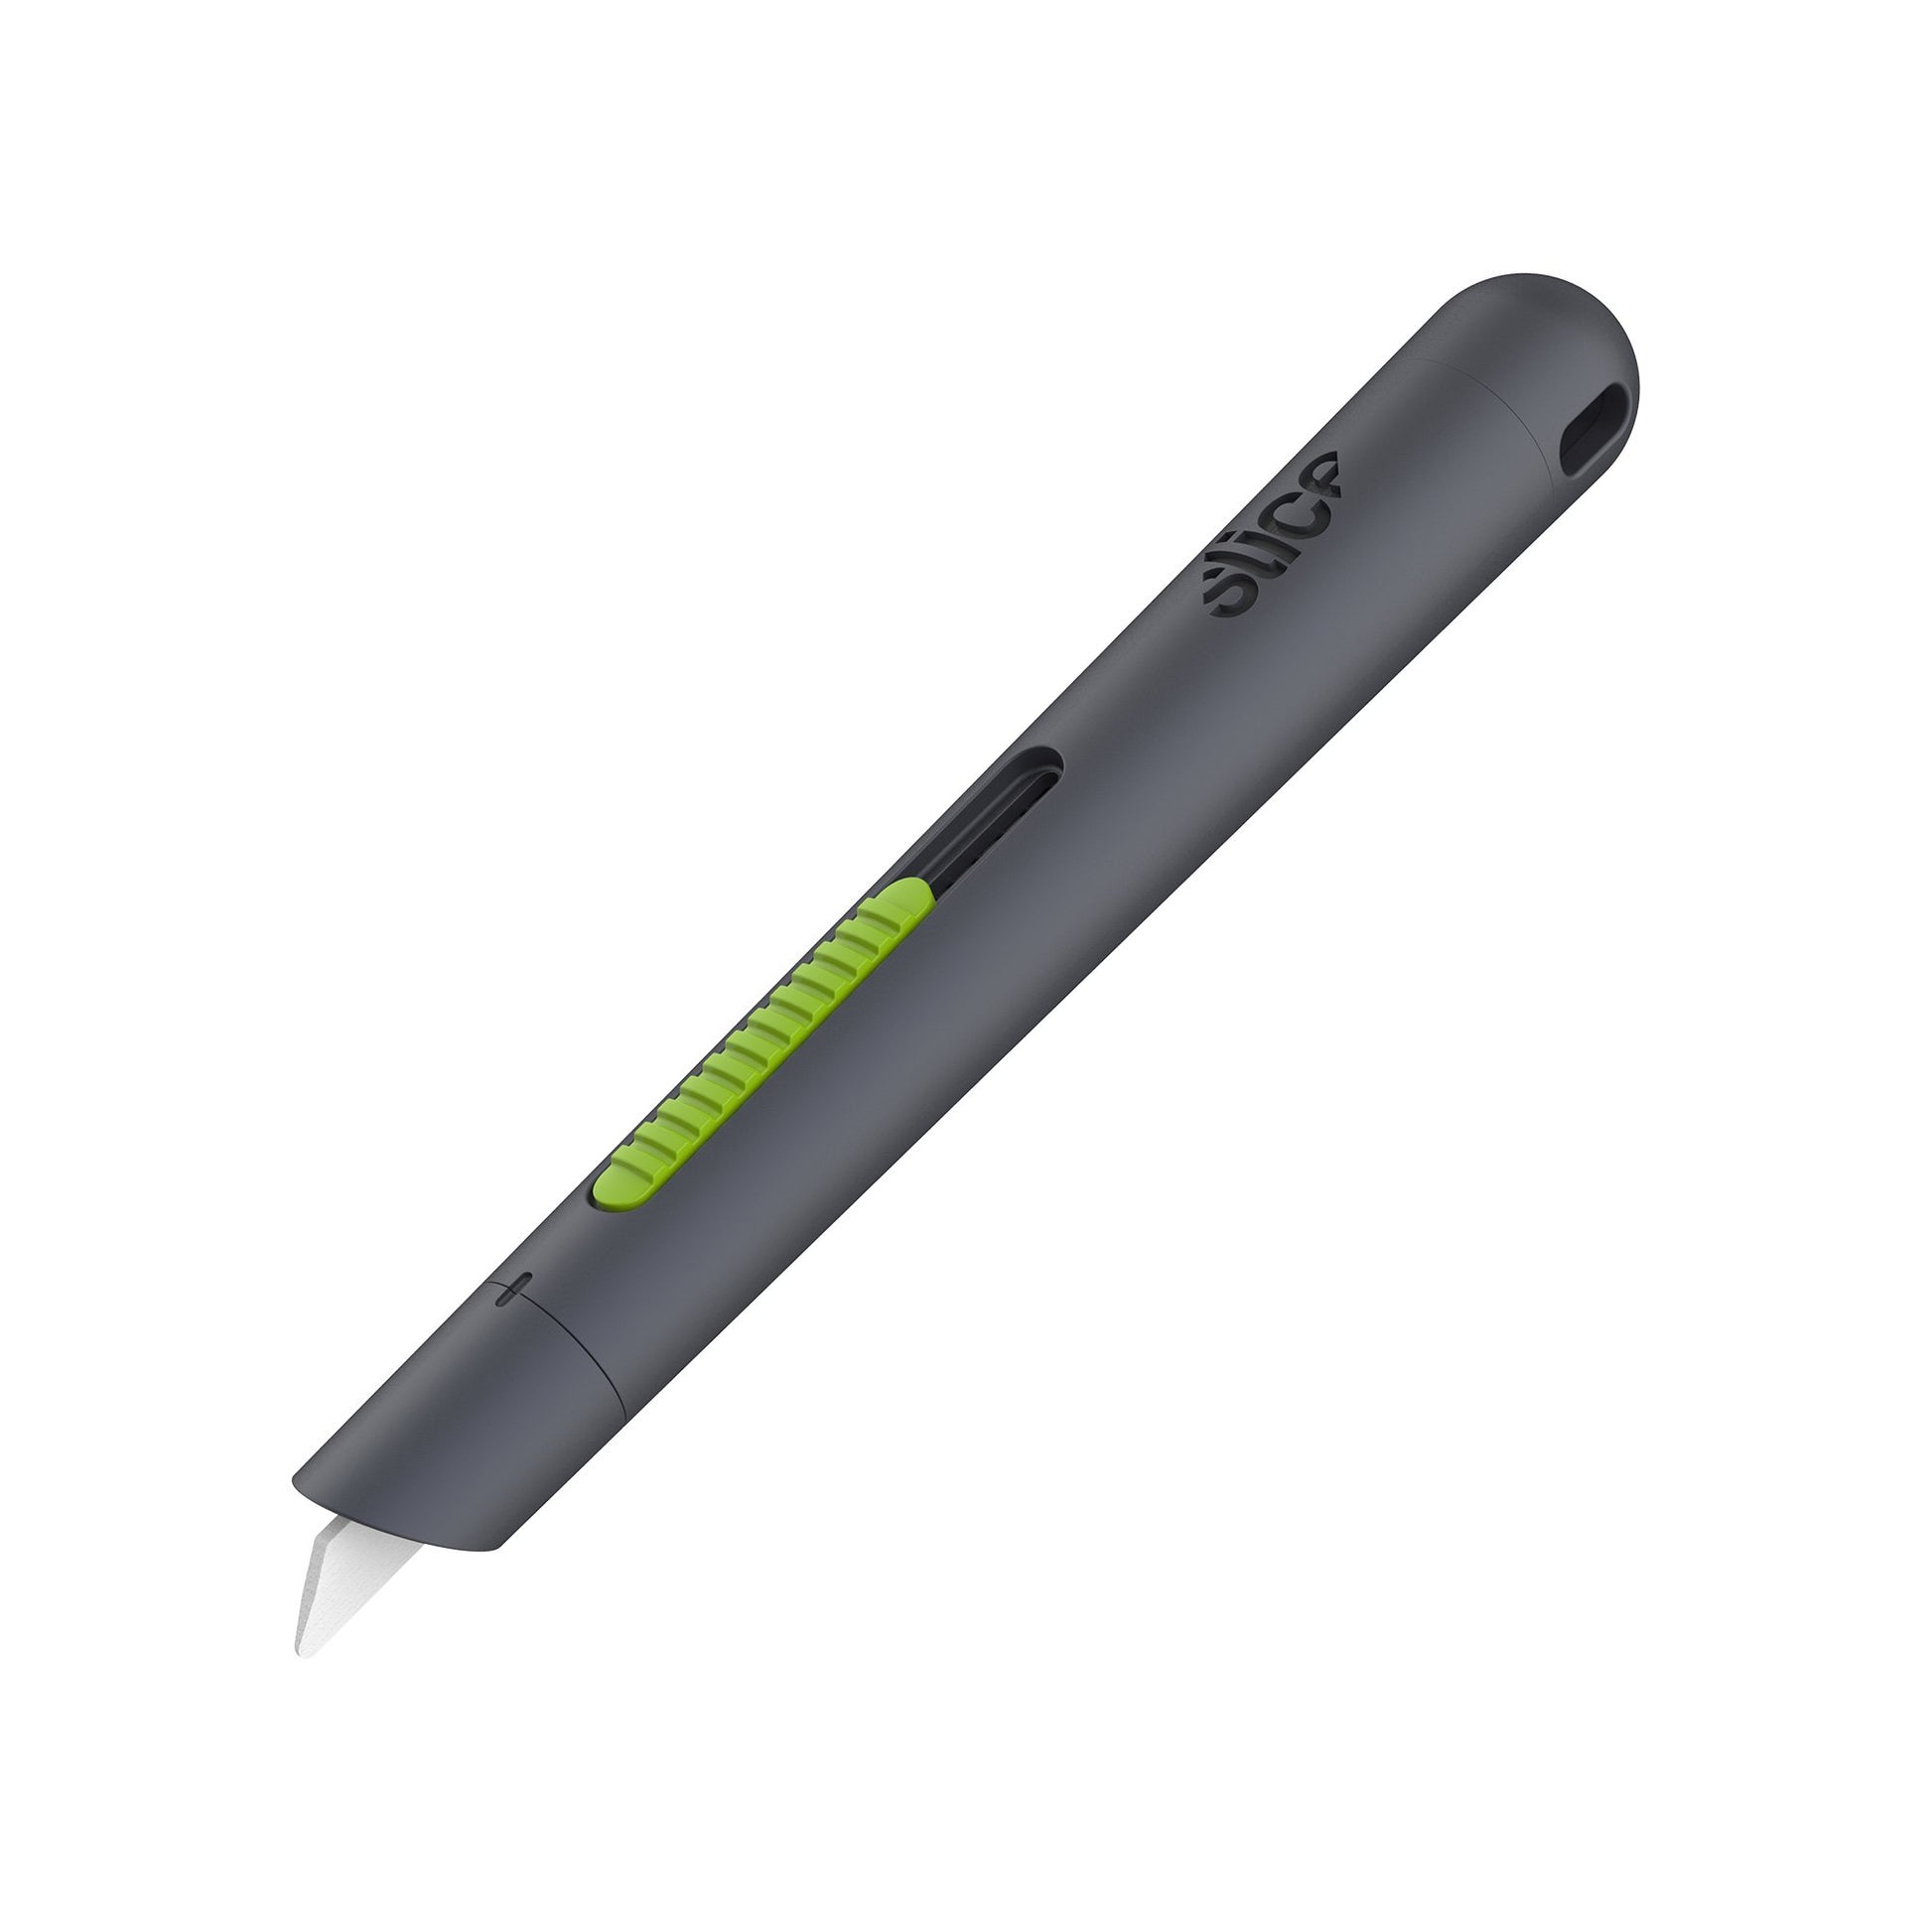 The Slice 10512 Auto-Retractable Pen Cutter with ceramic safety blade